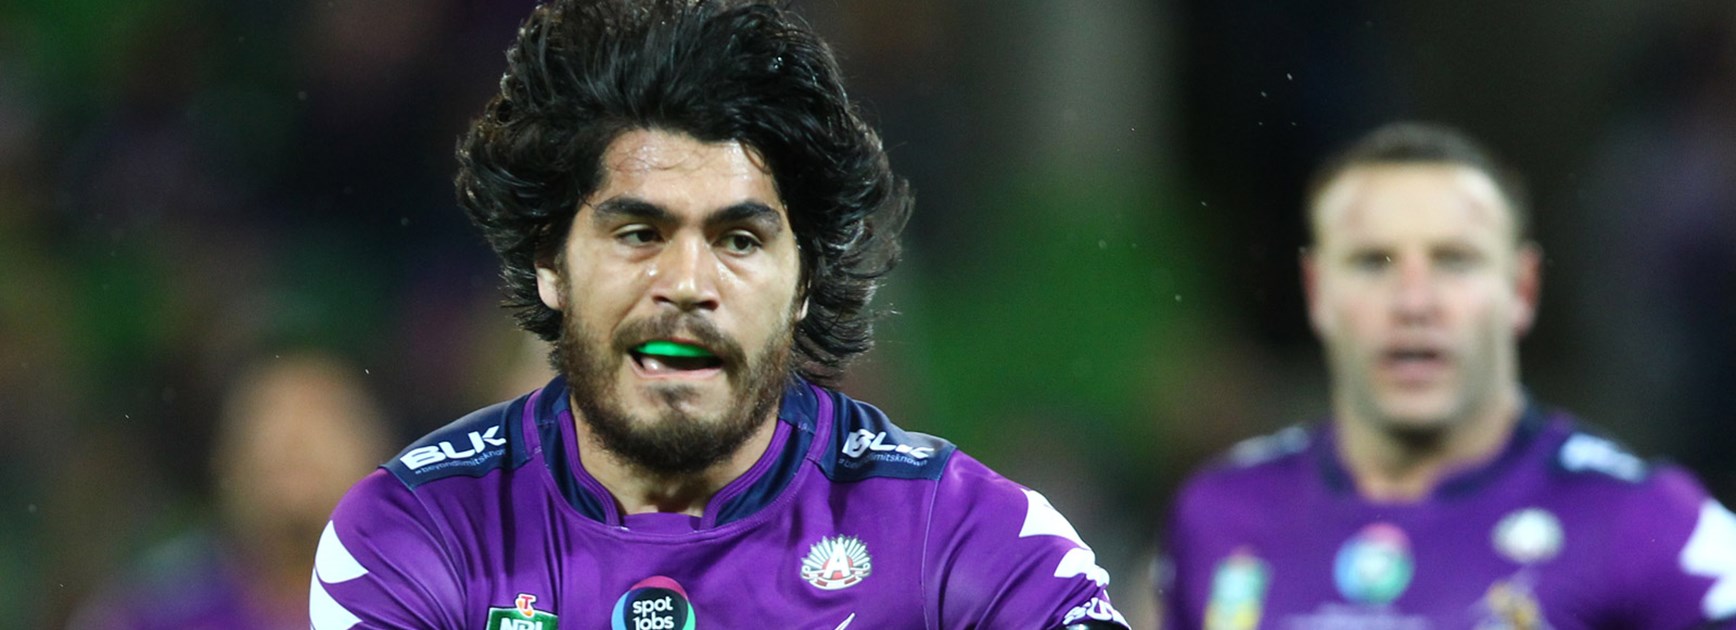 Tohu Harris will line up for the Storm in front of his home fans in Napier for the first time in Round 20.